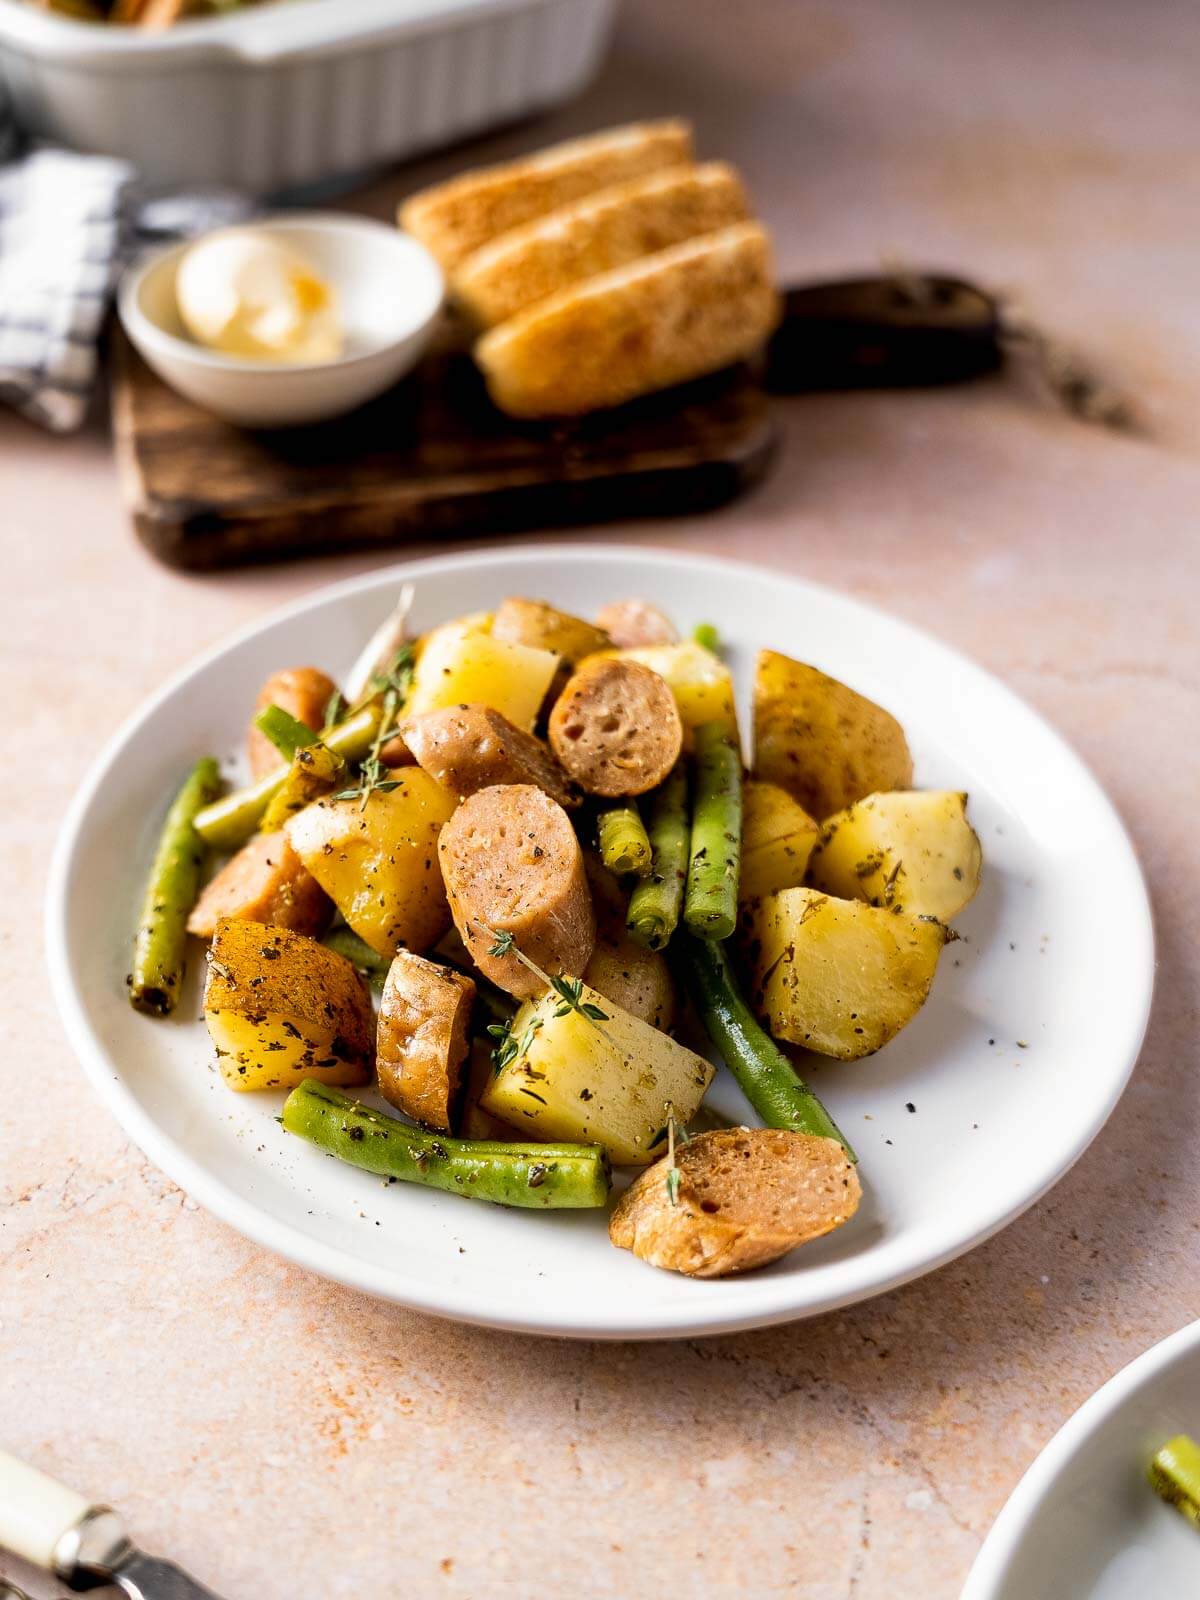 green beans with potatoes and sausage plated.